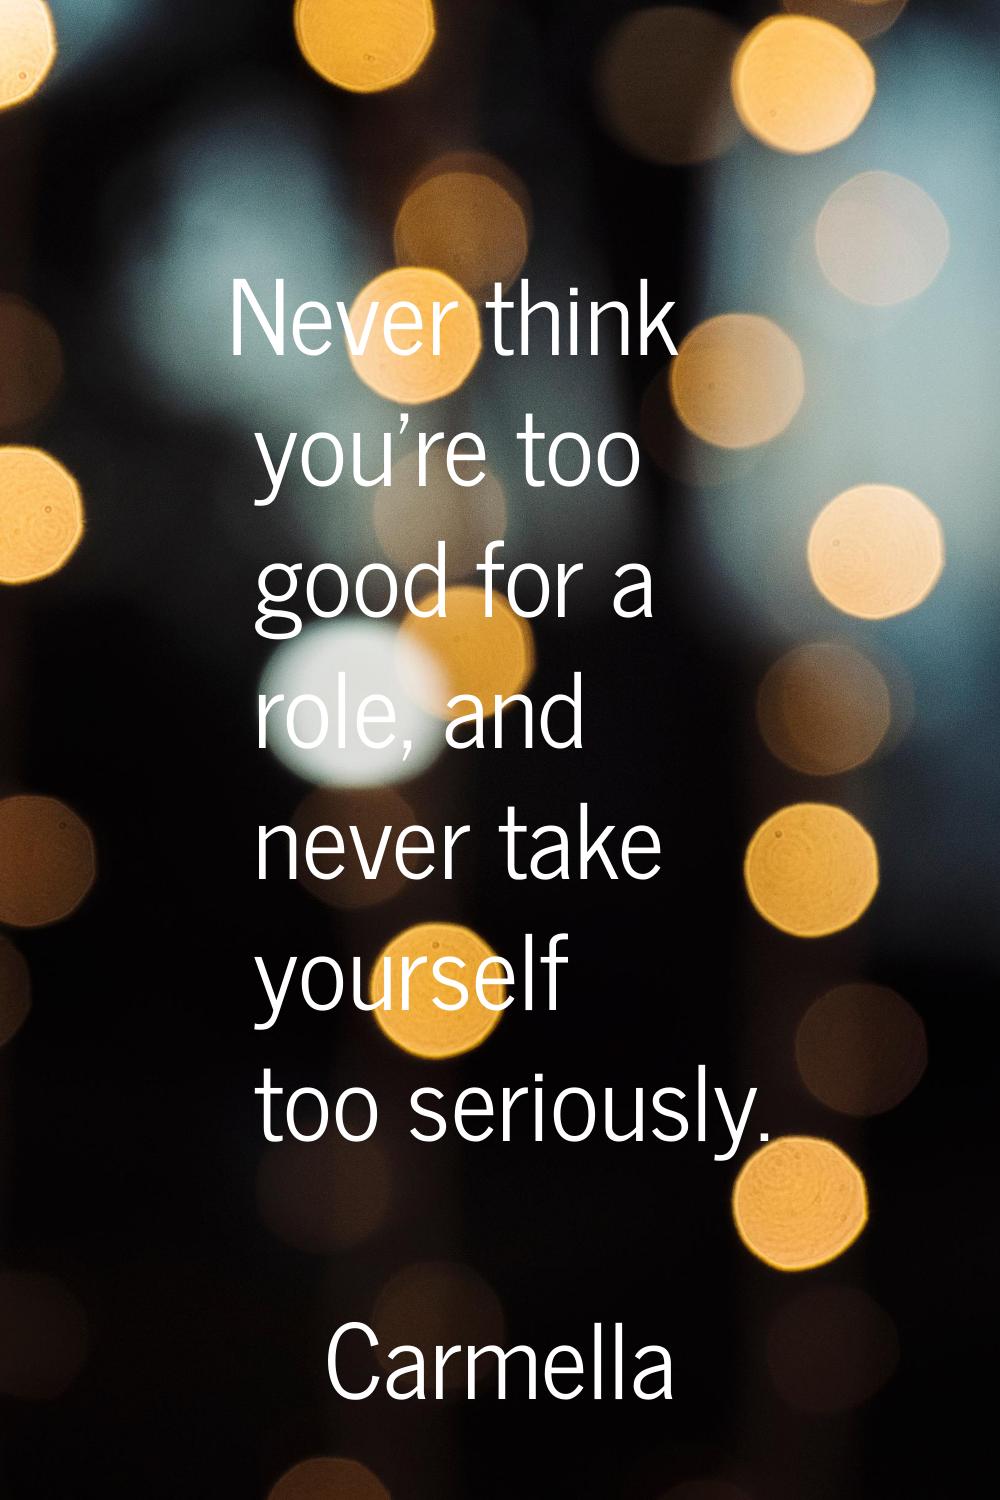 Never think you're too good for a role, and never take yourself too seriously.